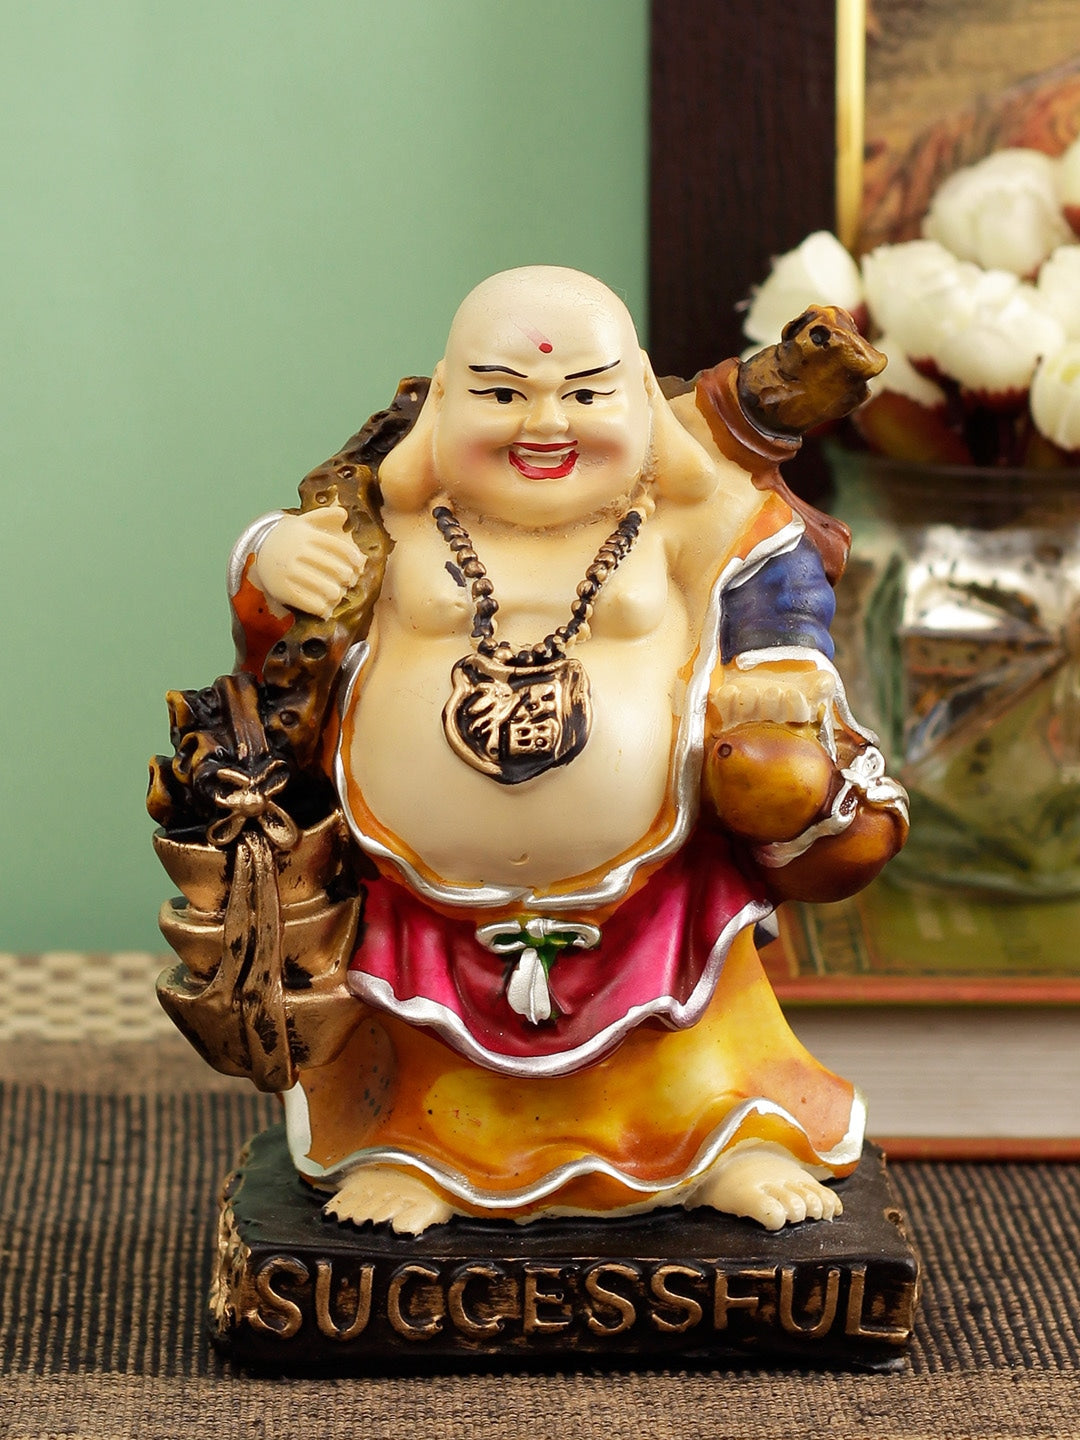 Embellished Lord Buddha Idol: Gift/Send Mother's Day Gifts Online  JVS1176769 |IGP.com